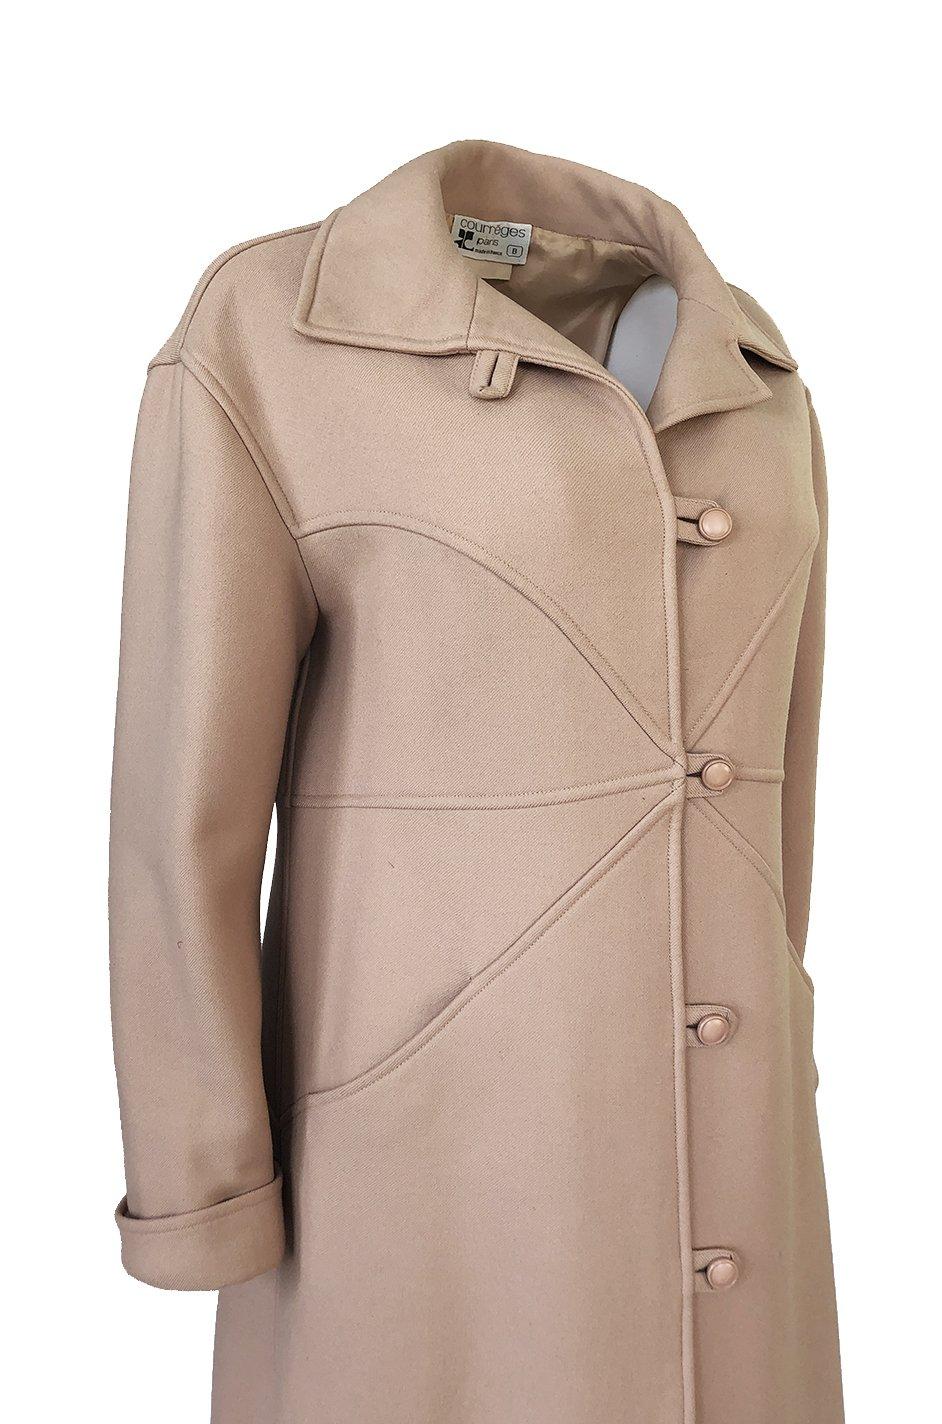 Immaculate 1960s Courreges Unusually Seamed Camel Toggle Coat 3